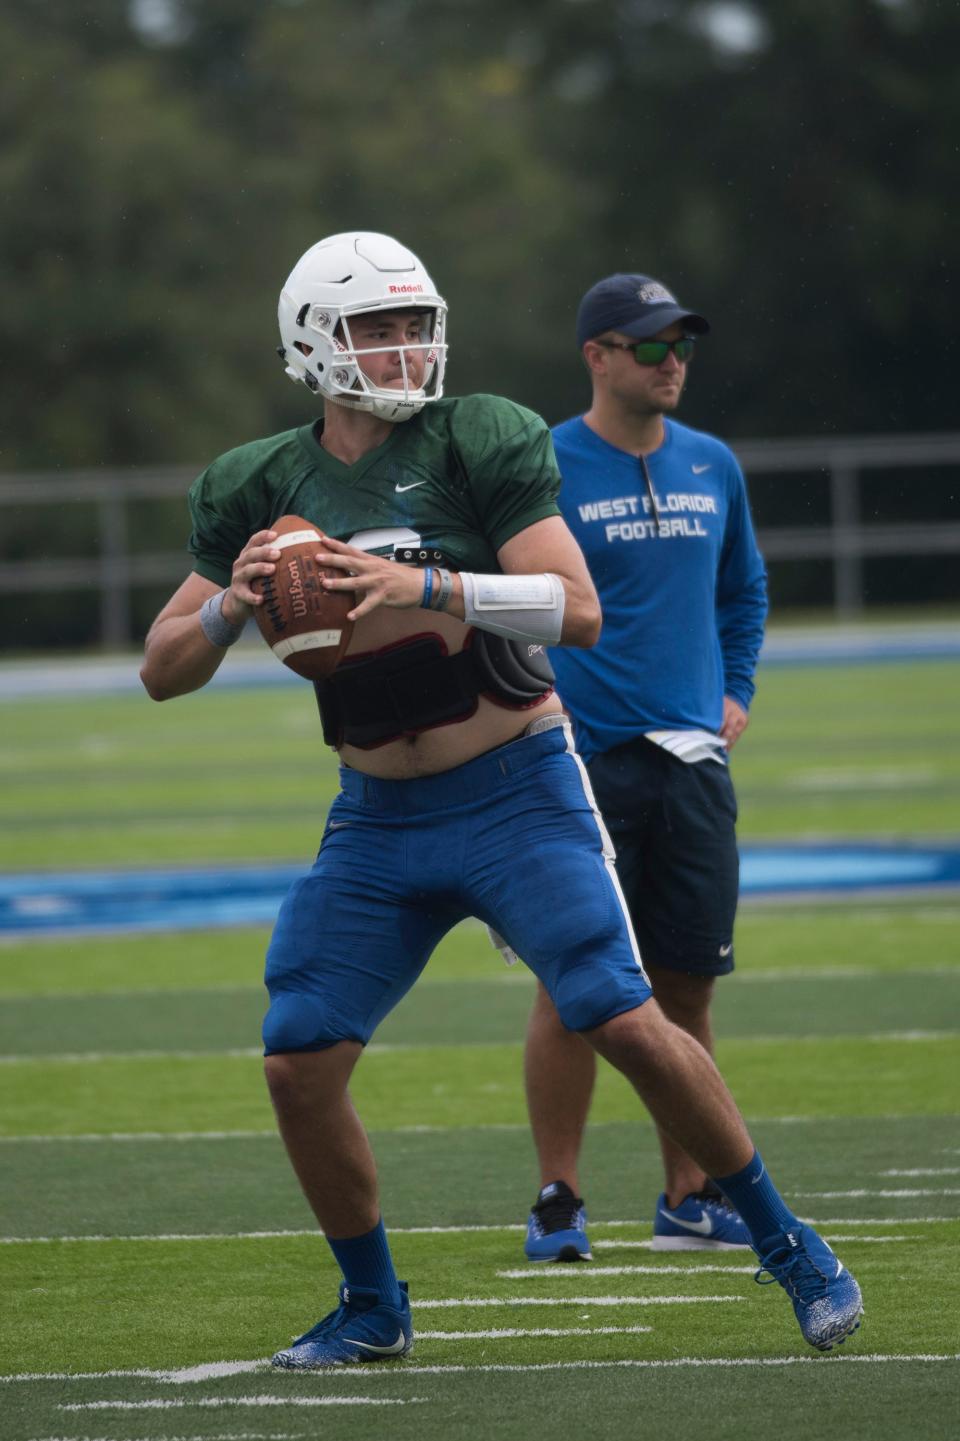 University of West Florida quarterback, Mike Beaudry, gets in his reps during team practice on Friday, Aug. 10, 2018.